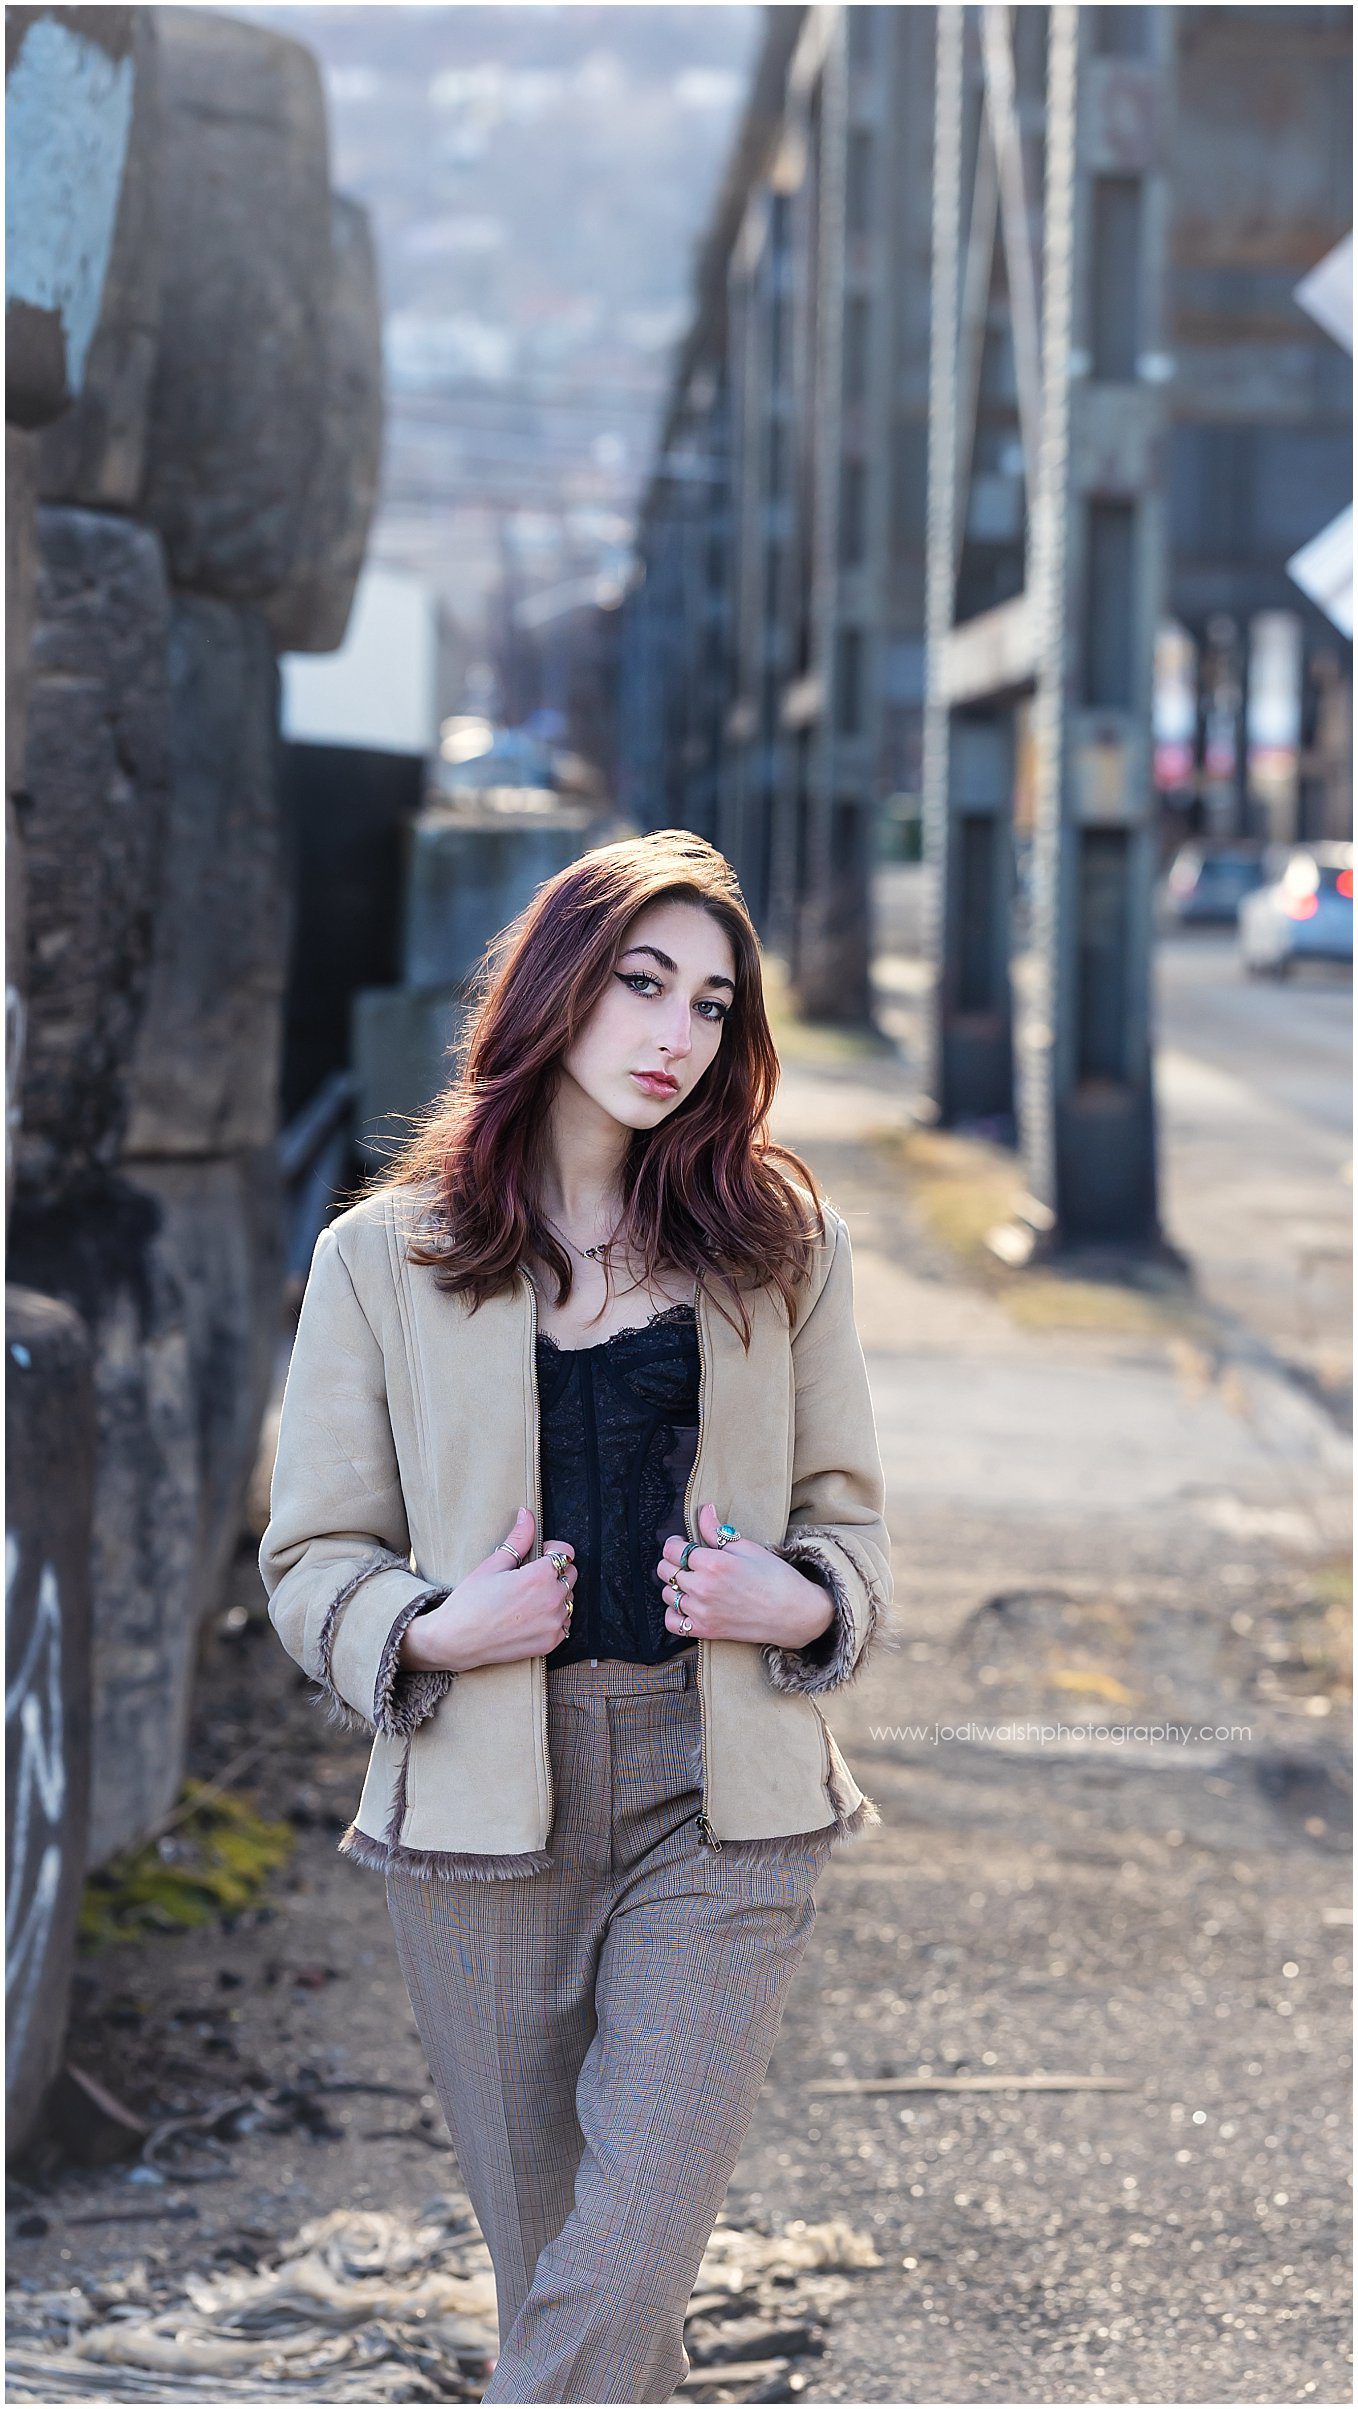 image of a senior girl walking along an industrial alley in Pittsburgh's Strip District. She has long dark hair and is wearing beige plaid pants and a beige jacket with a fur collar.